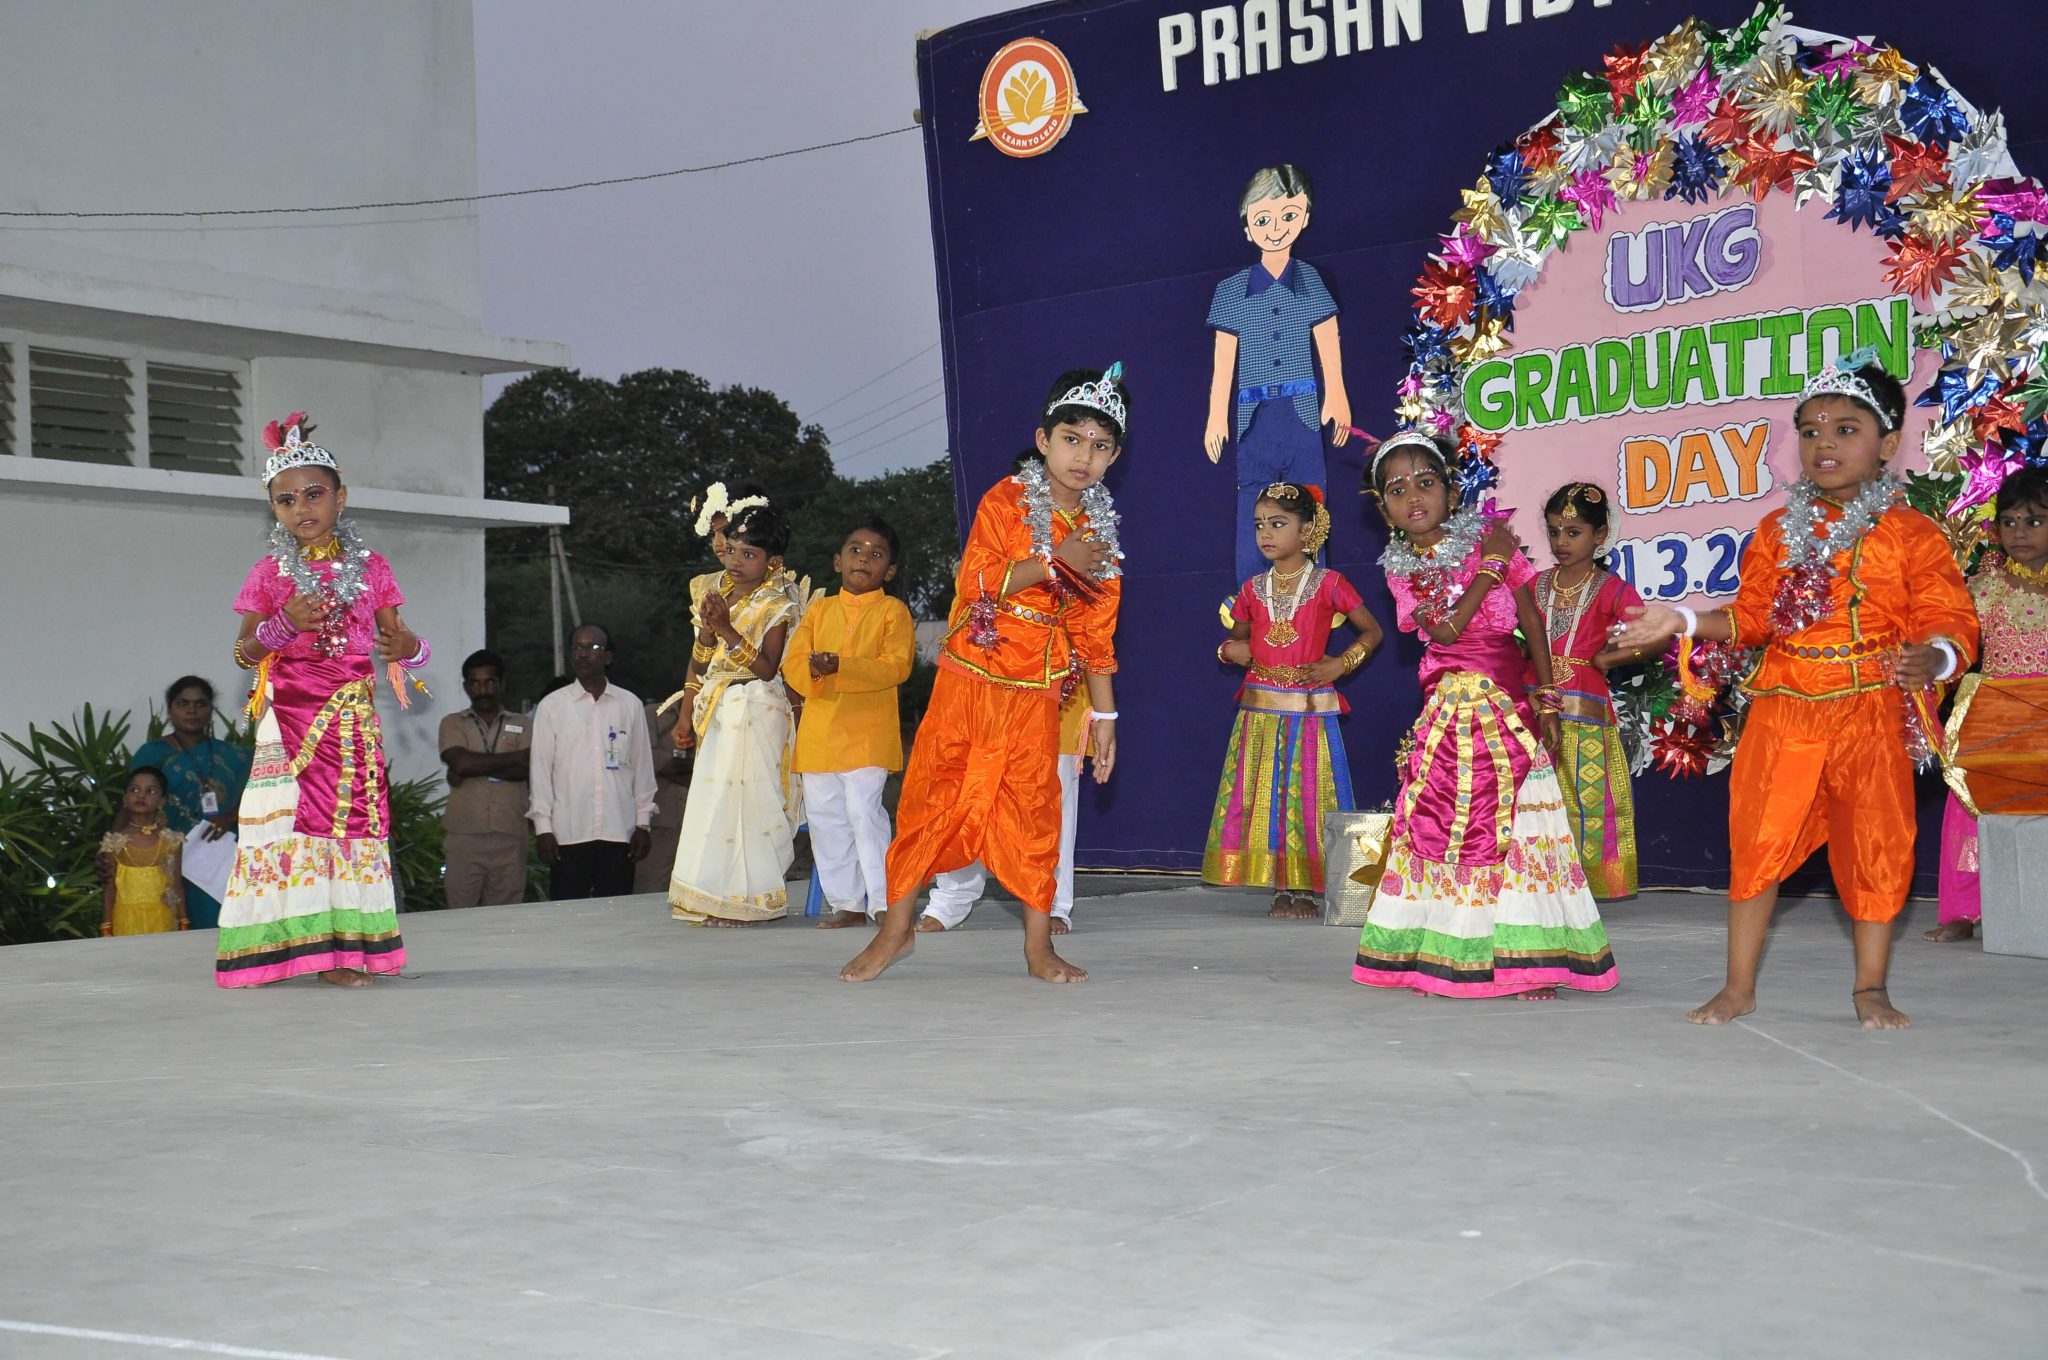 Diversity in culture and tradition reflected in the variety of Indian dances.